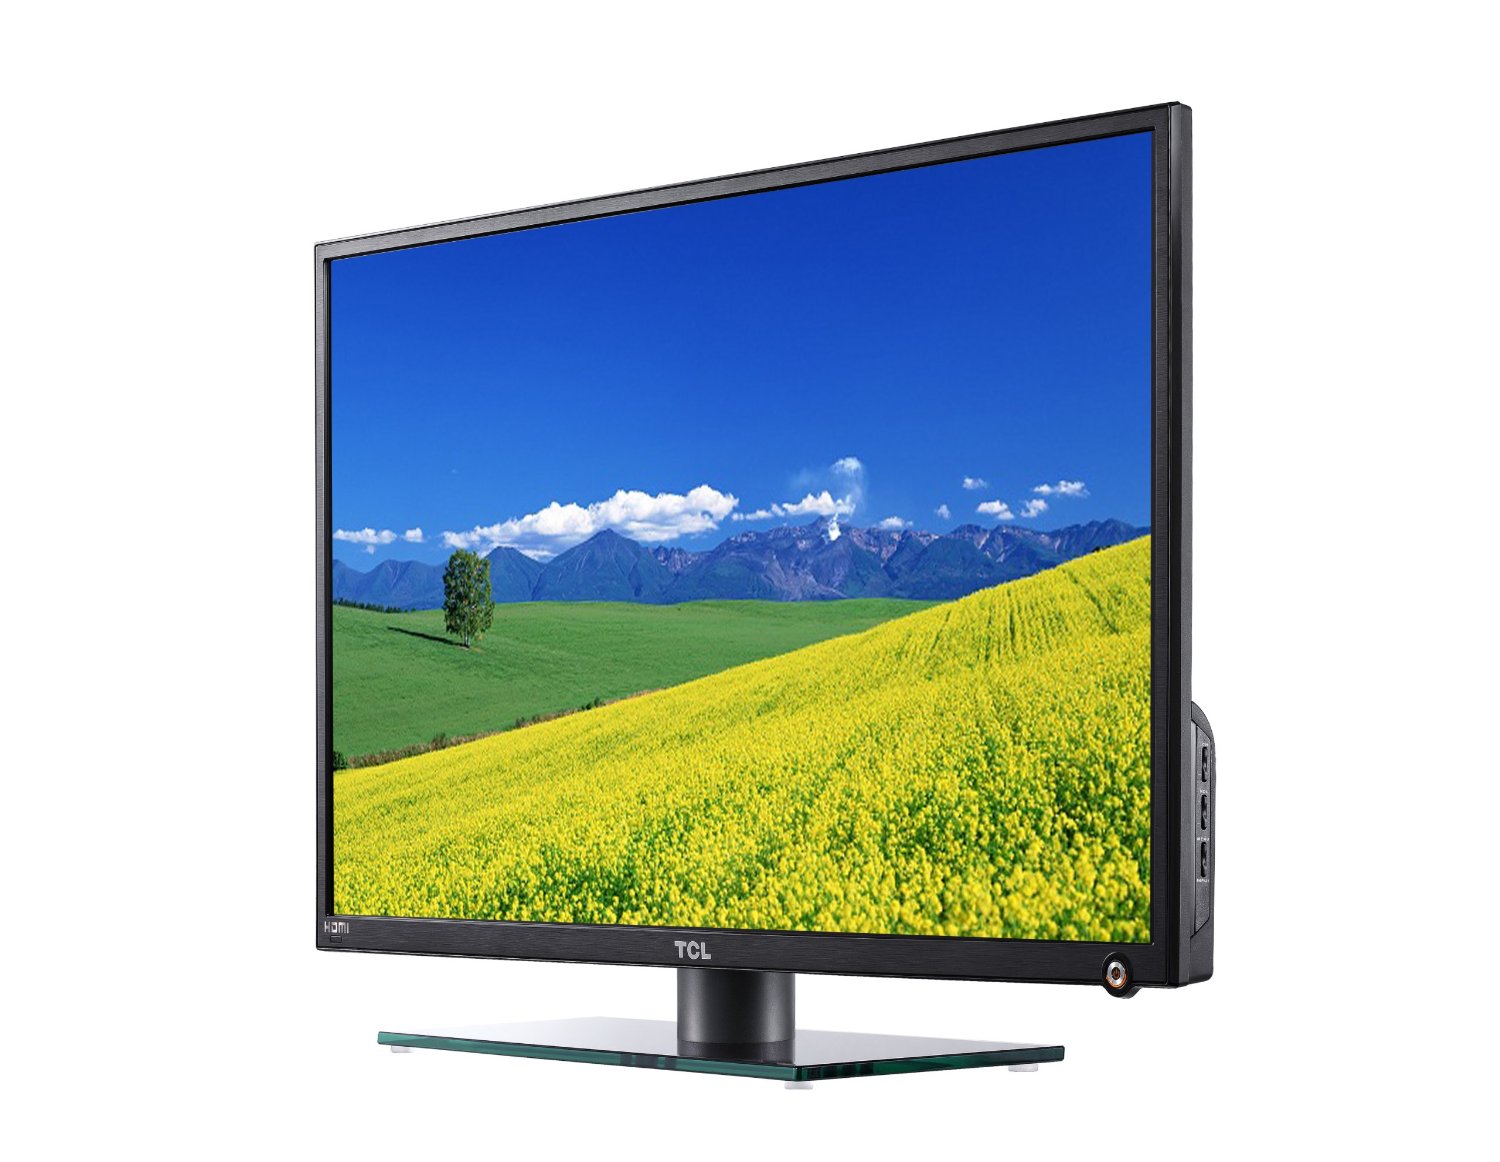 Great Offers TCL LE46FHDE5300 46-Inch 1080p Slim LED HDTV with 2-Year Limited Warranty (Black) รูปที่ 1